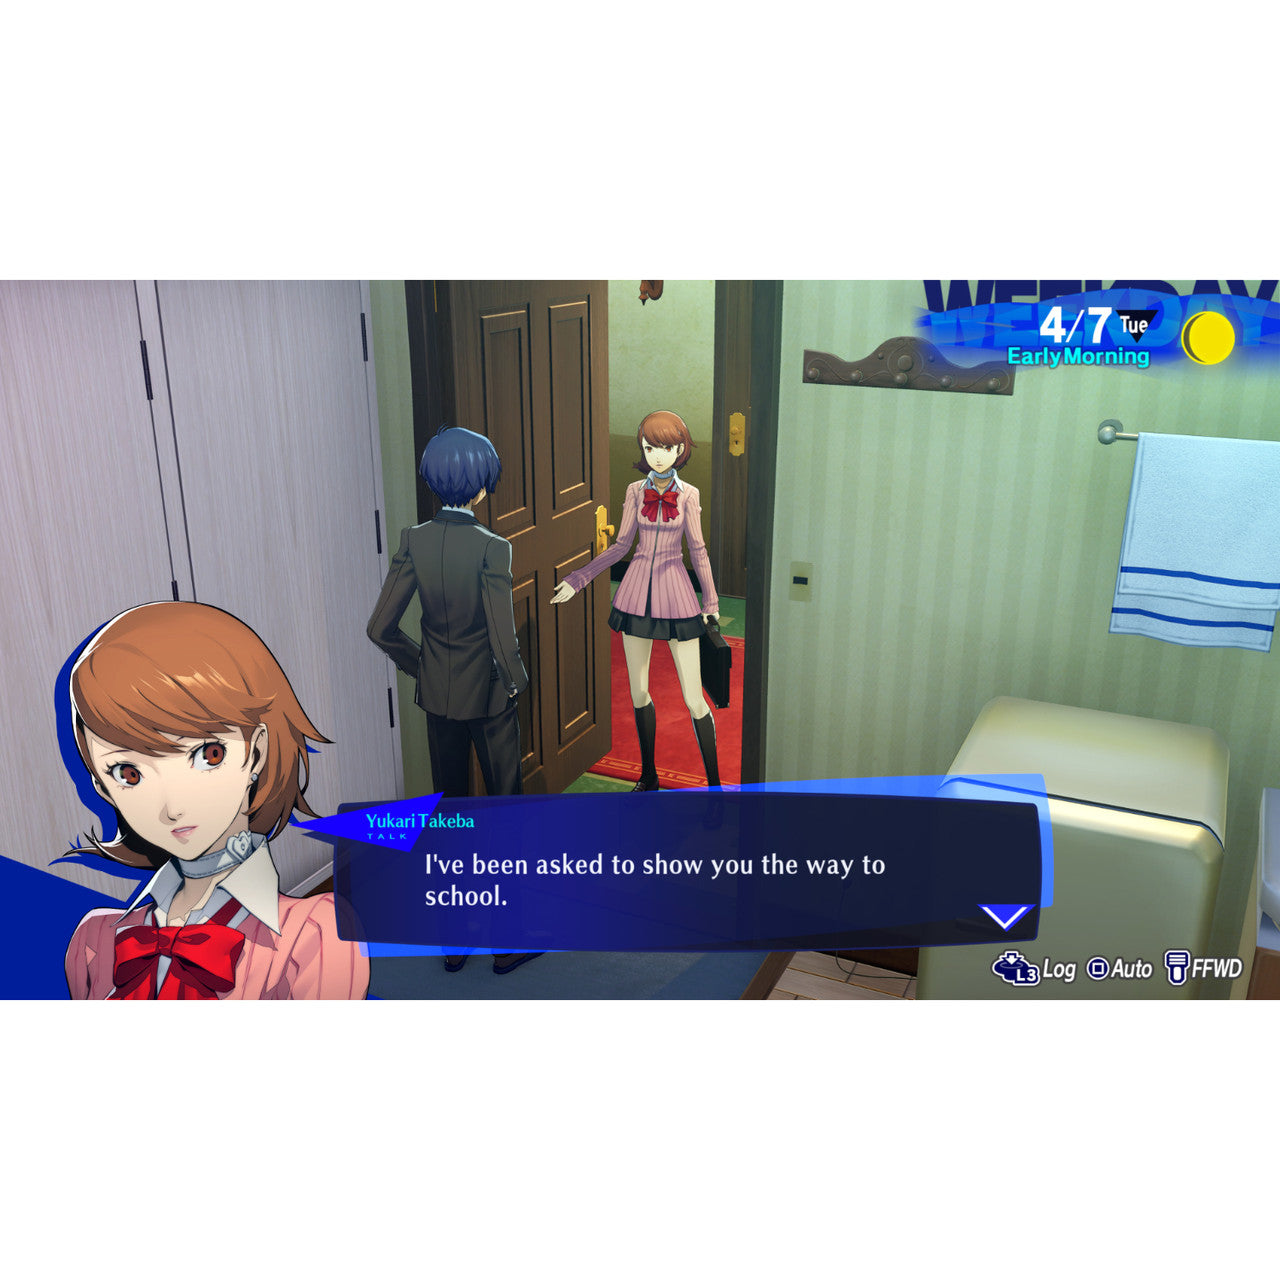 Persona 3 Reload Launch Edition - (NEW) (PlayStation 5)